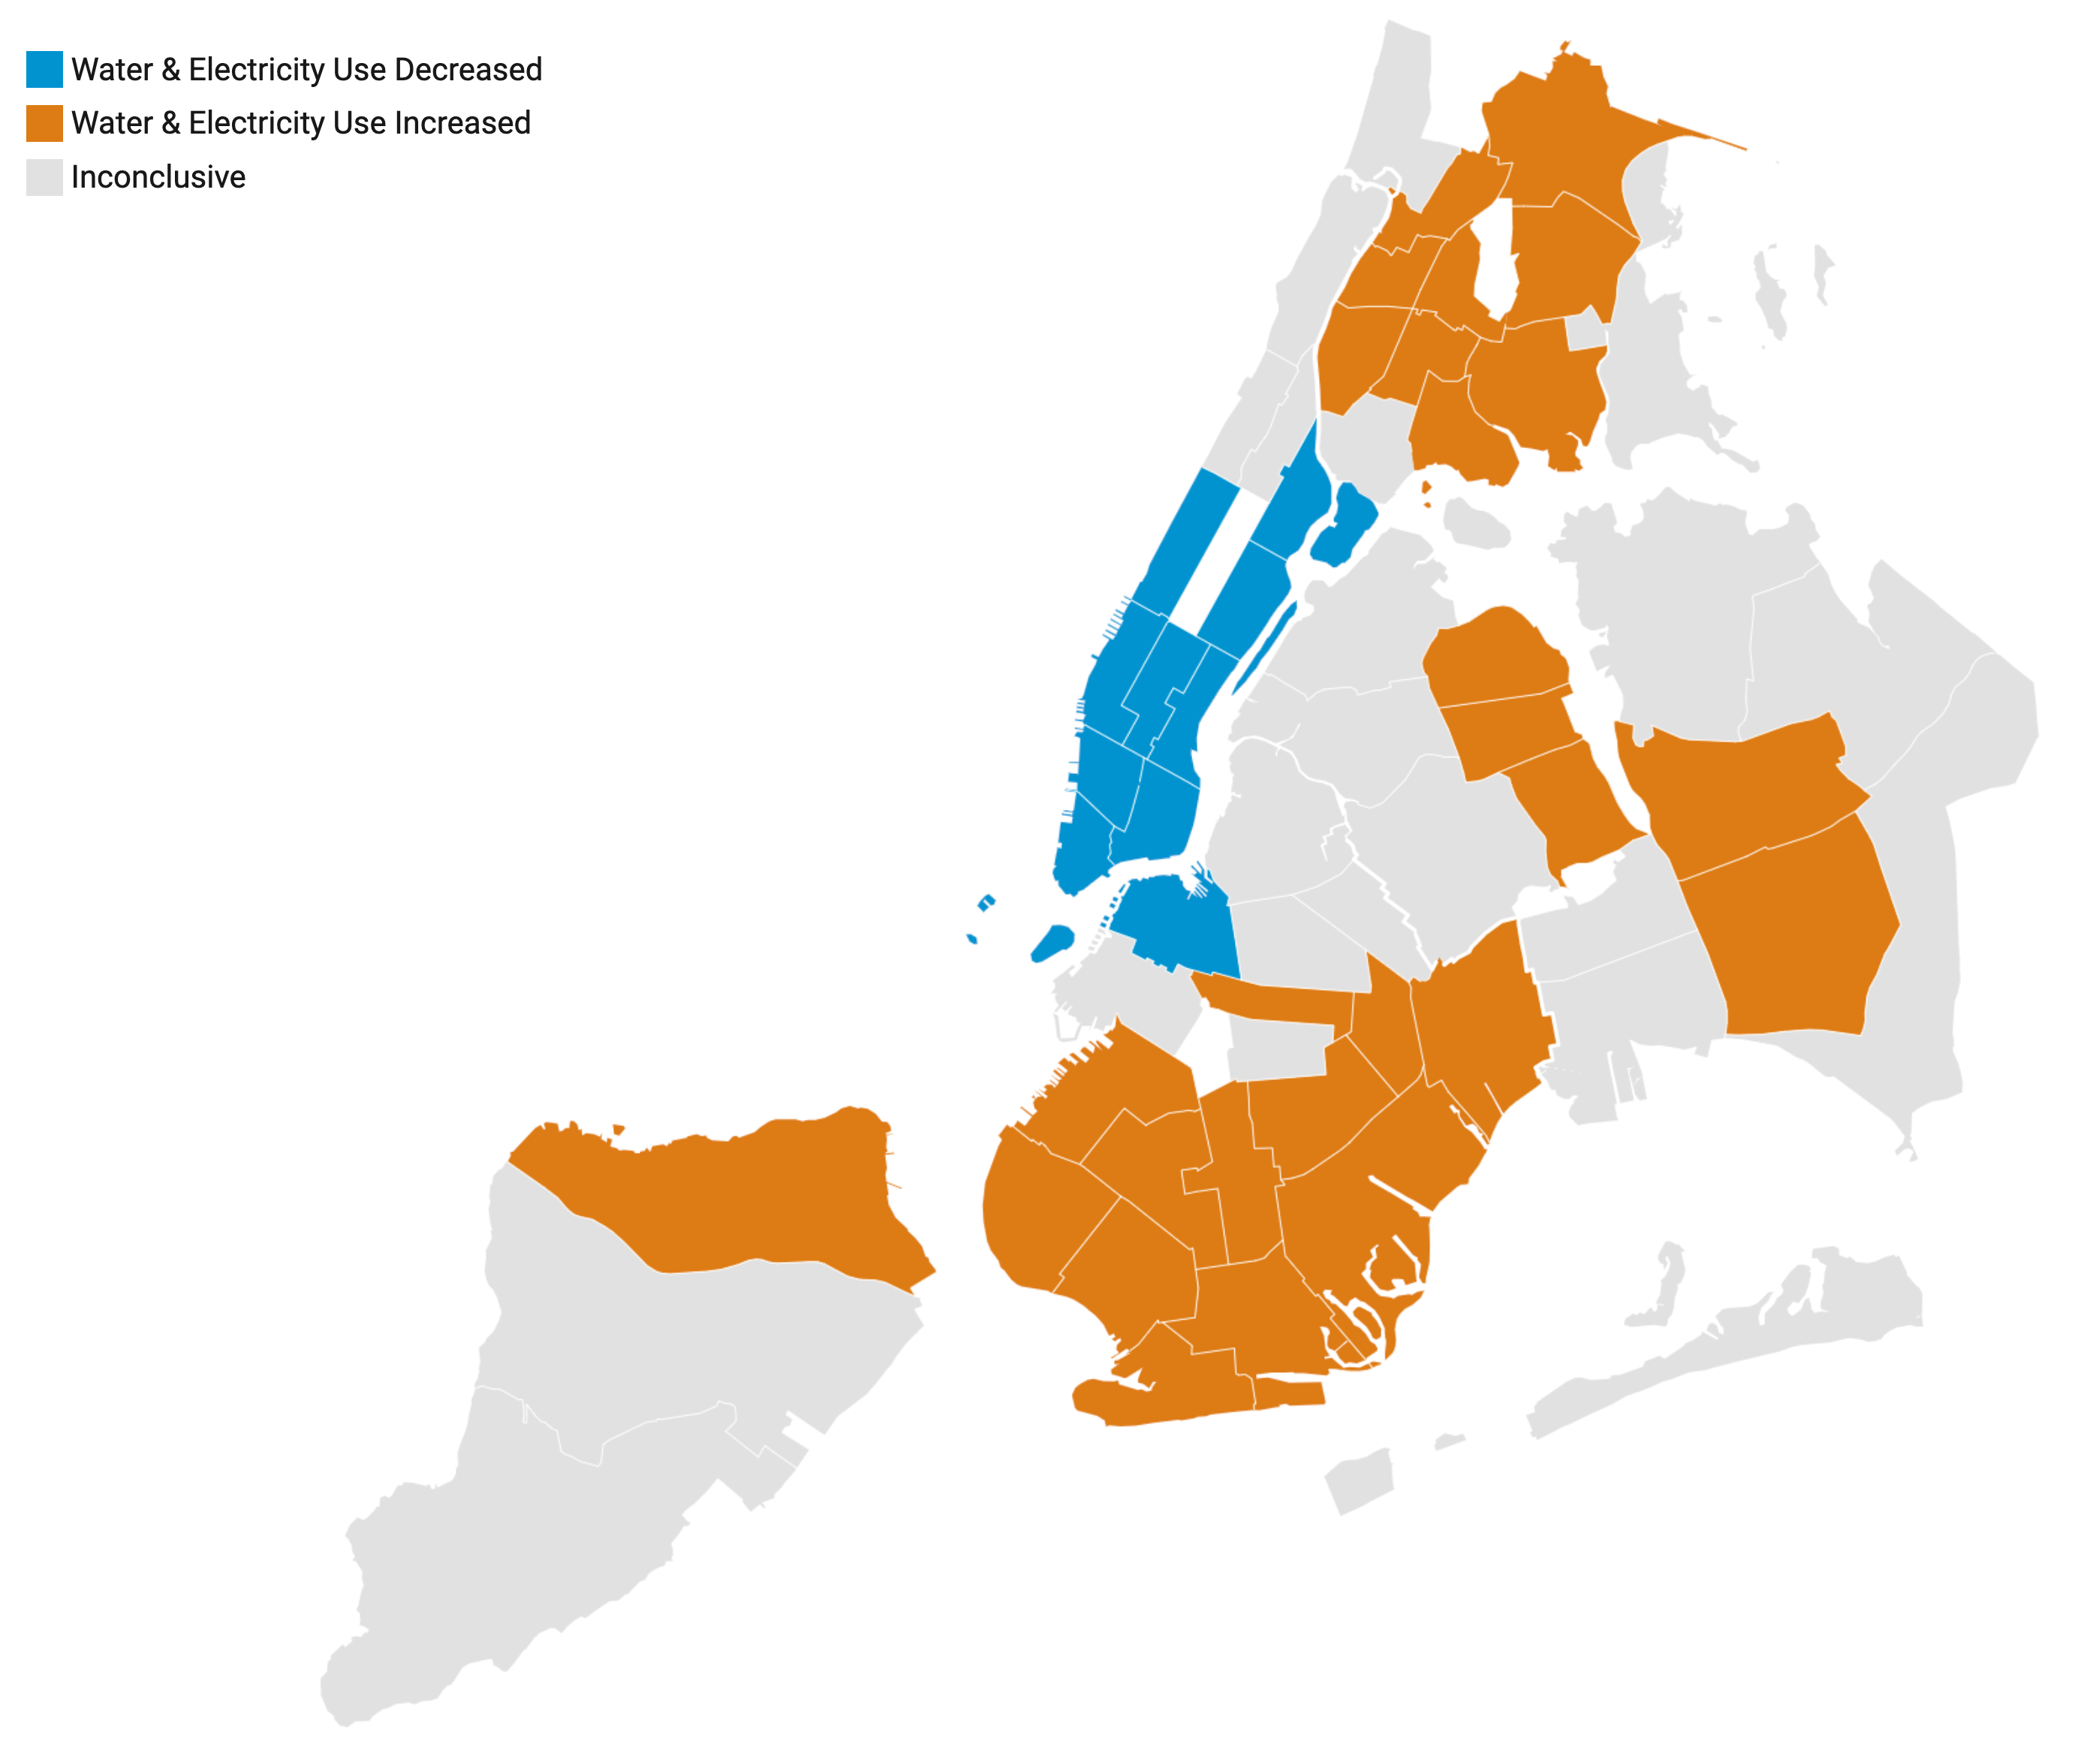 A map of New York City that shows that water and energy use decreased in Manhattan while increasing in outer neighborhoods.